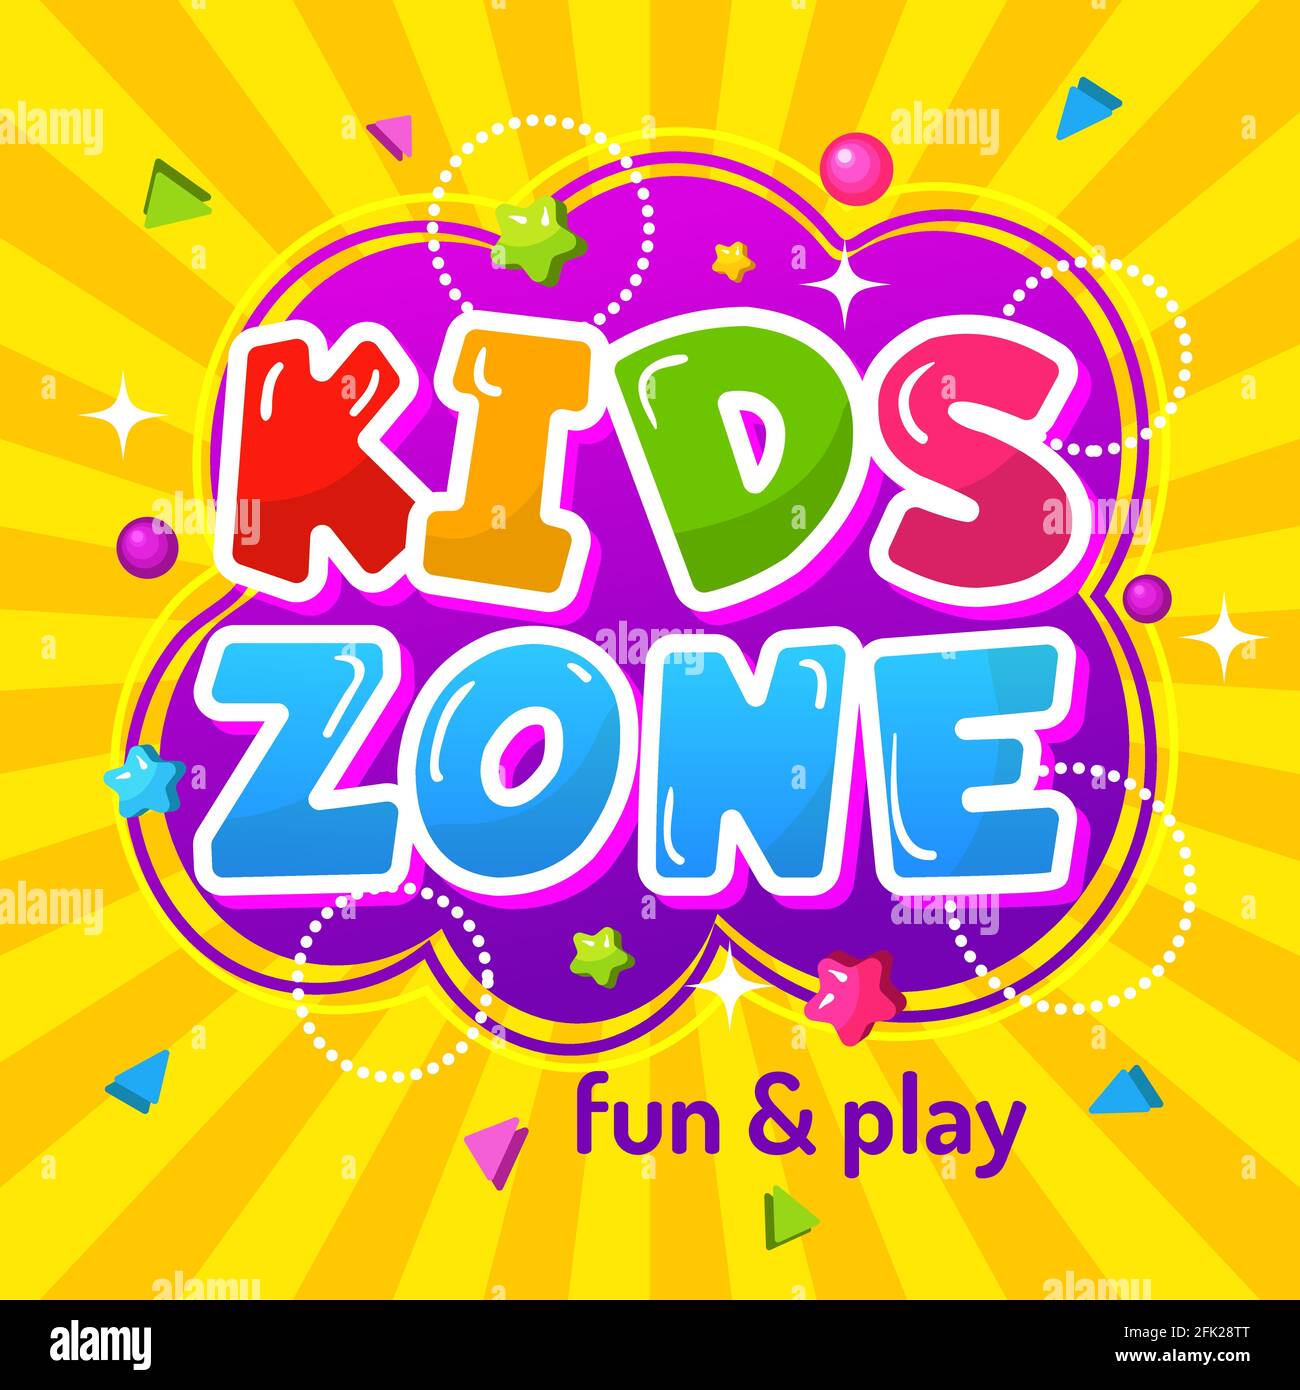 Kids zone. Promotional colorful game area poster happy childrens emblem for playground vector template Stock Vector